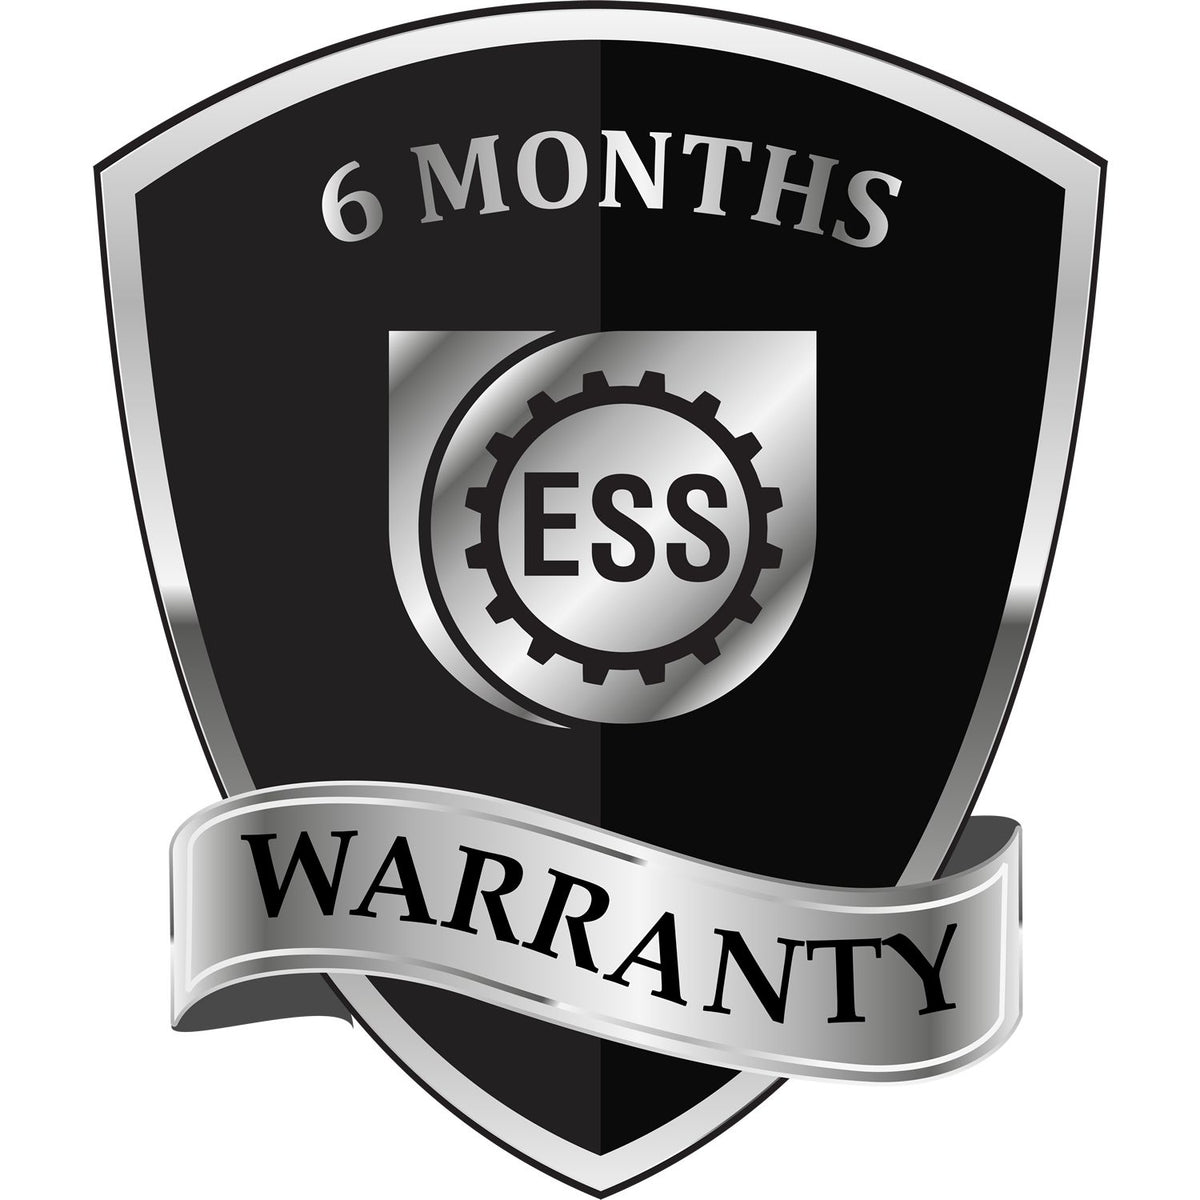 A badge or emblem showing a warranty icon for the Ohio Professional Engineer Seal Stamp